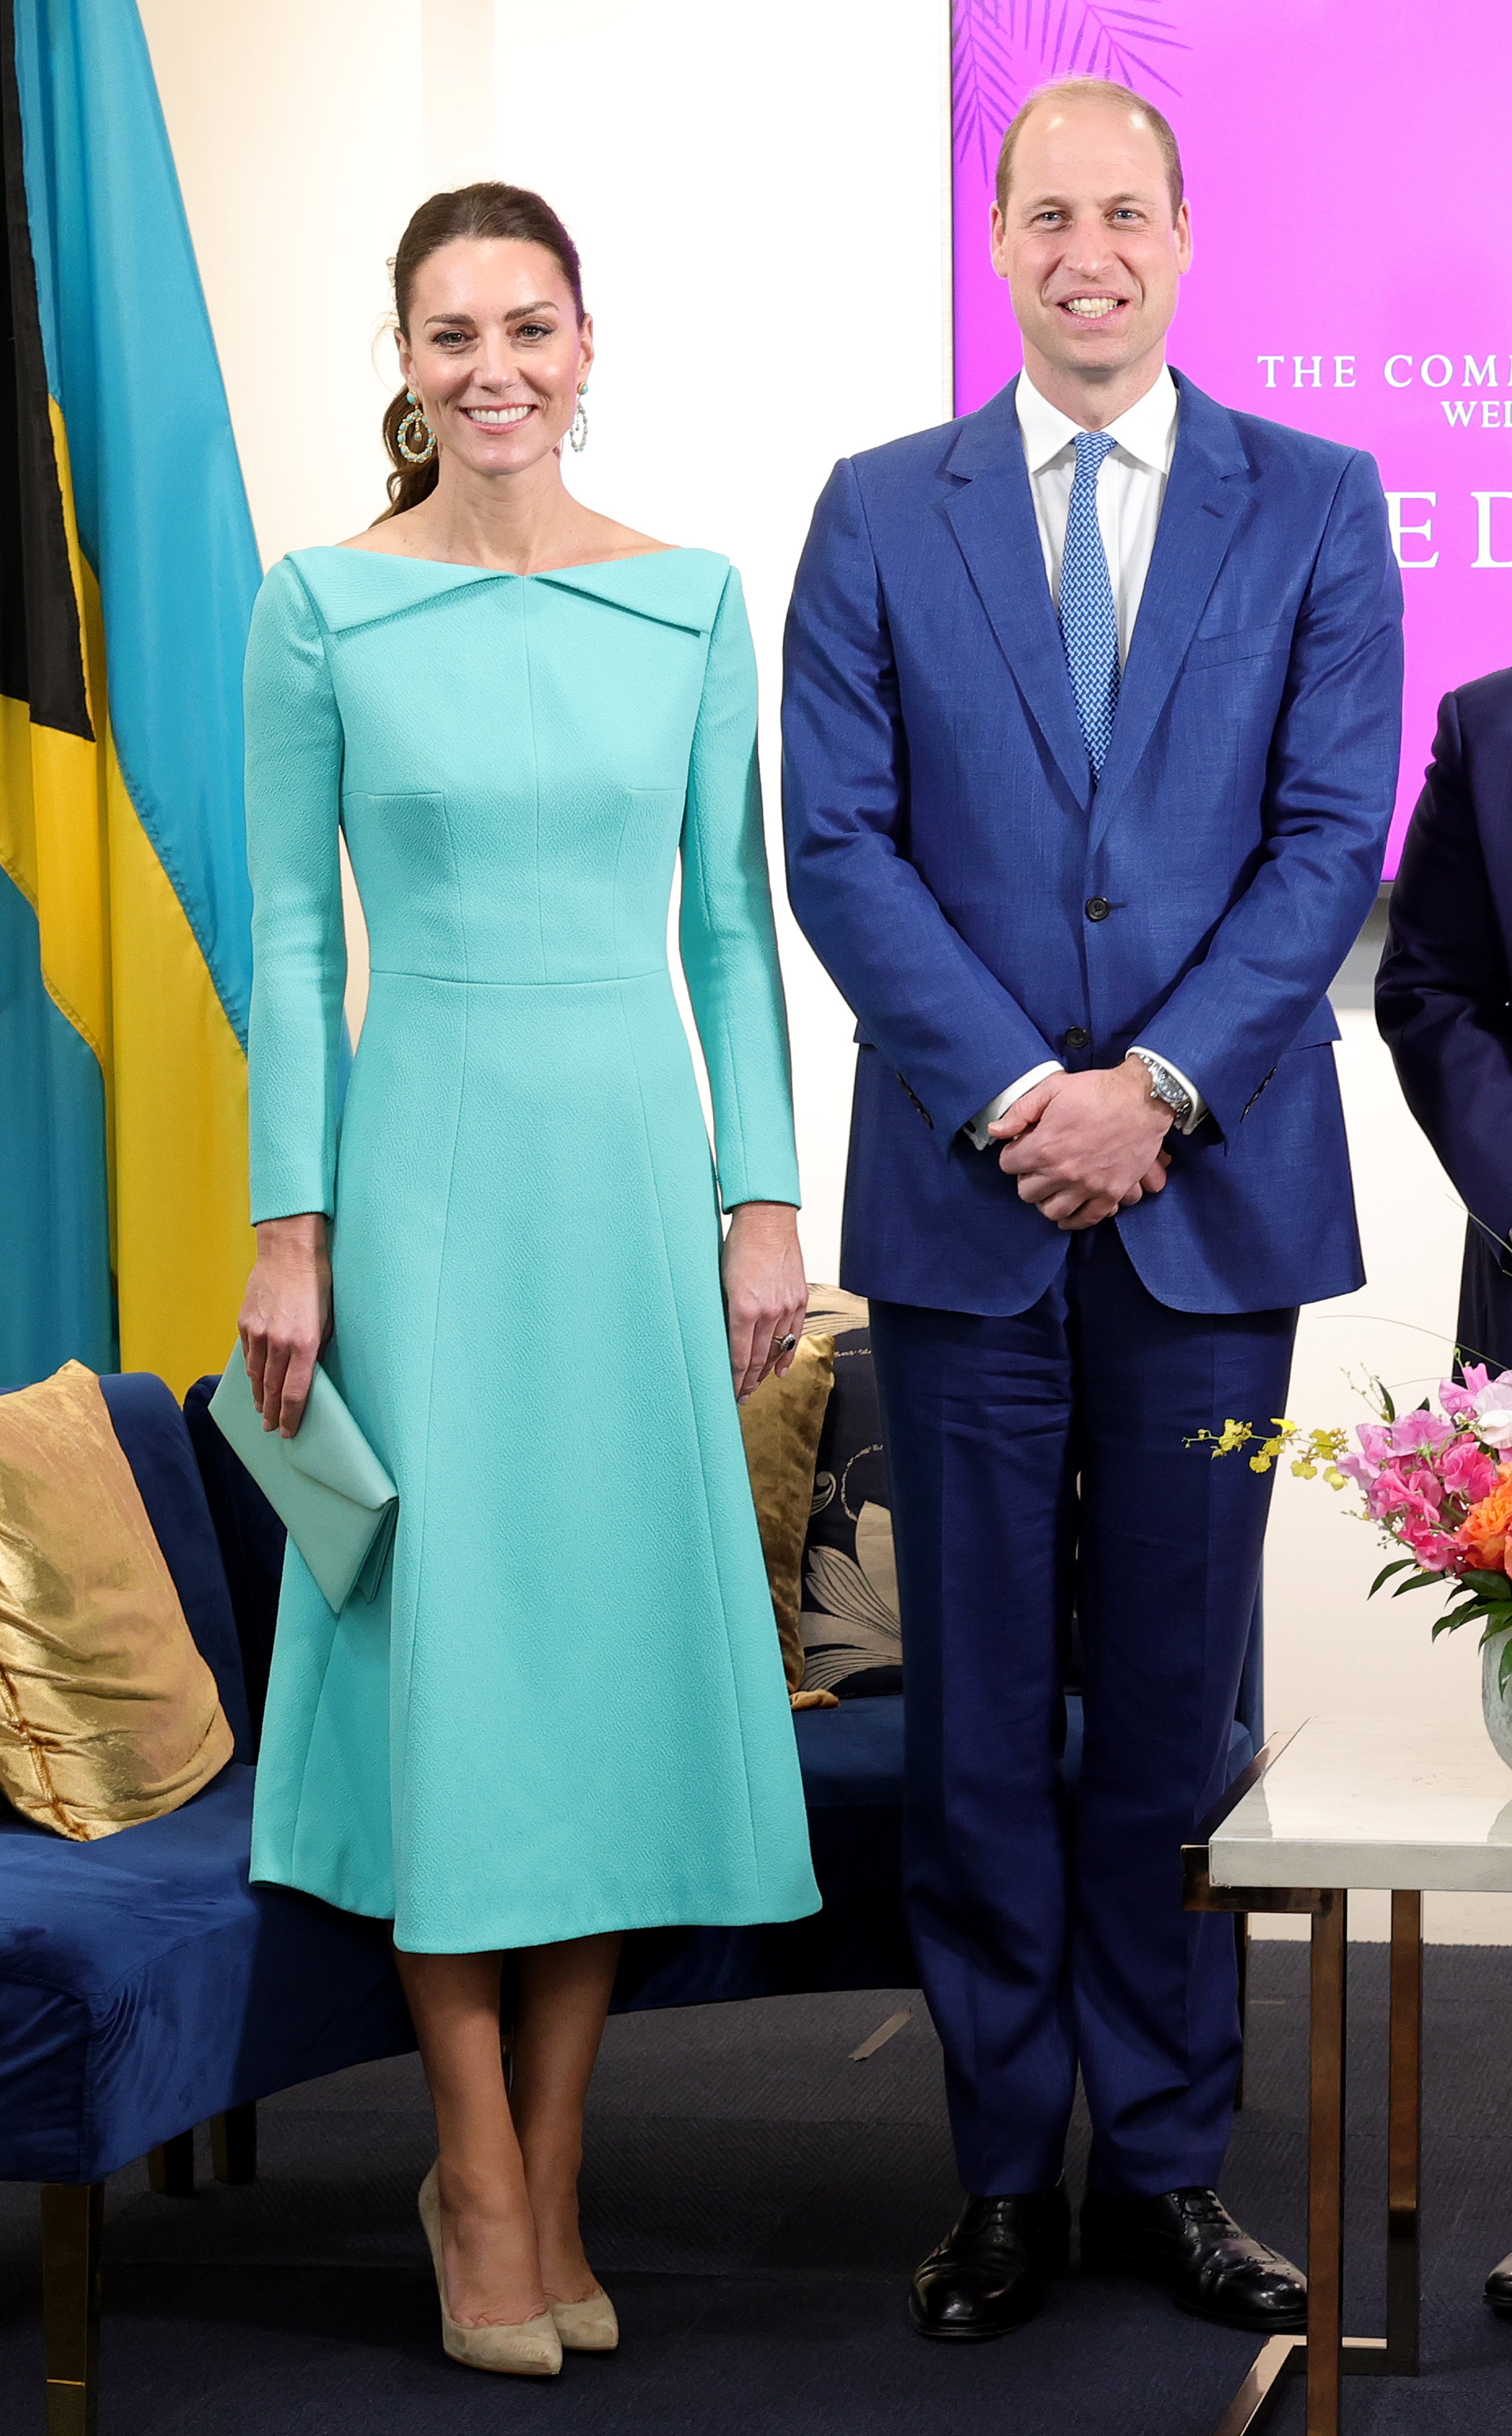 The Duke and Duchess of Cambridge on their visit to Belize, Jamaica and The Bahamas on behalf of Her Majesty The Queen on the occasion of the Platinum Jubilee on March 24 2022 | Source: Getty Images